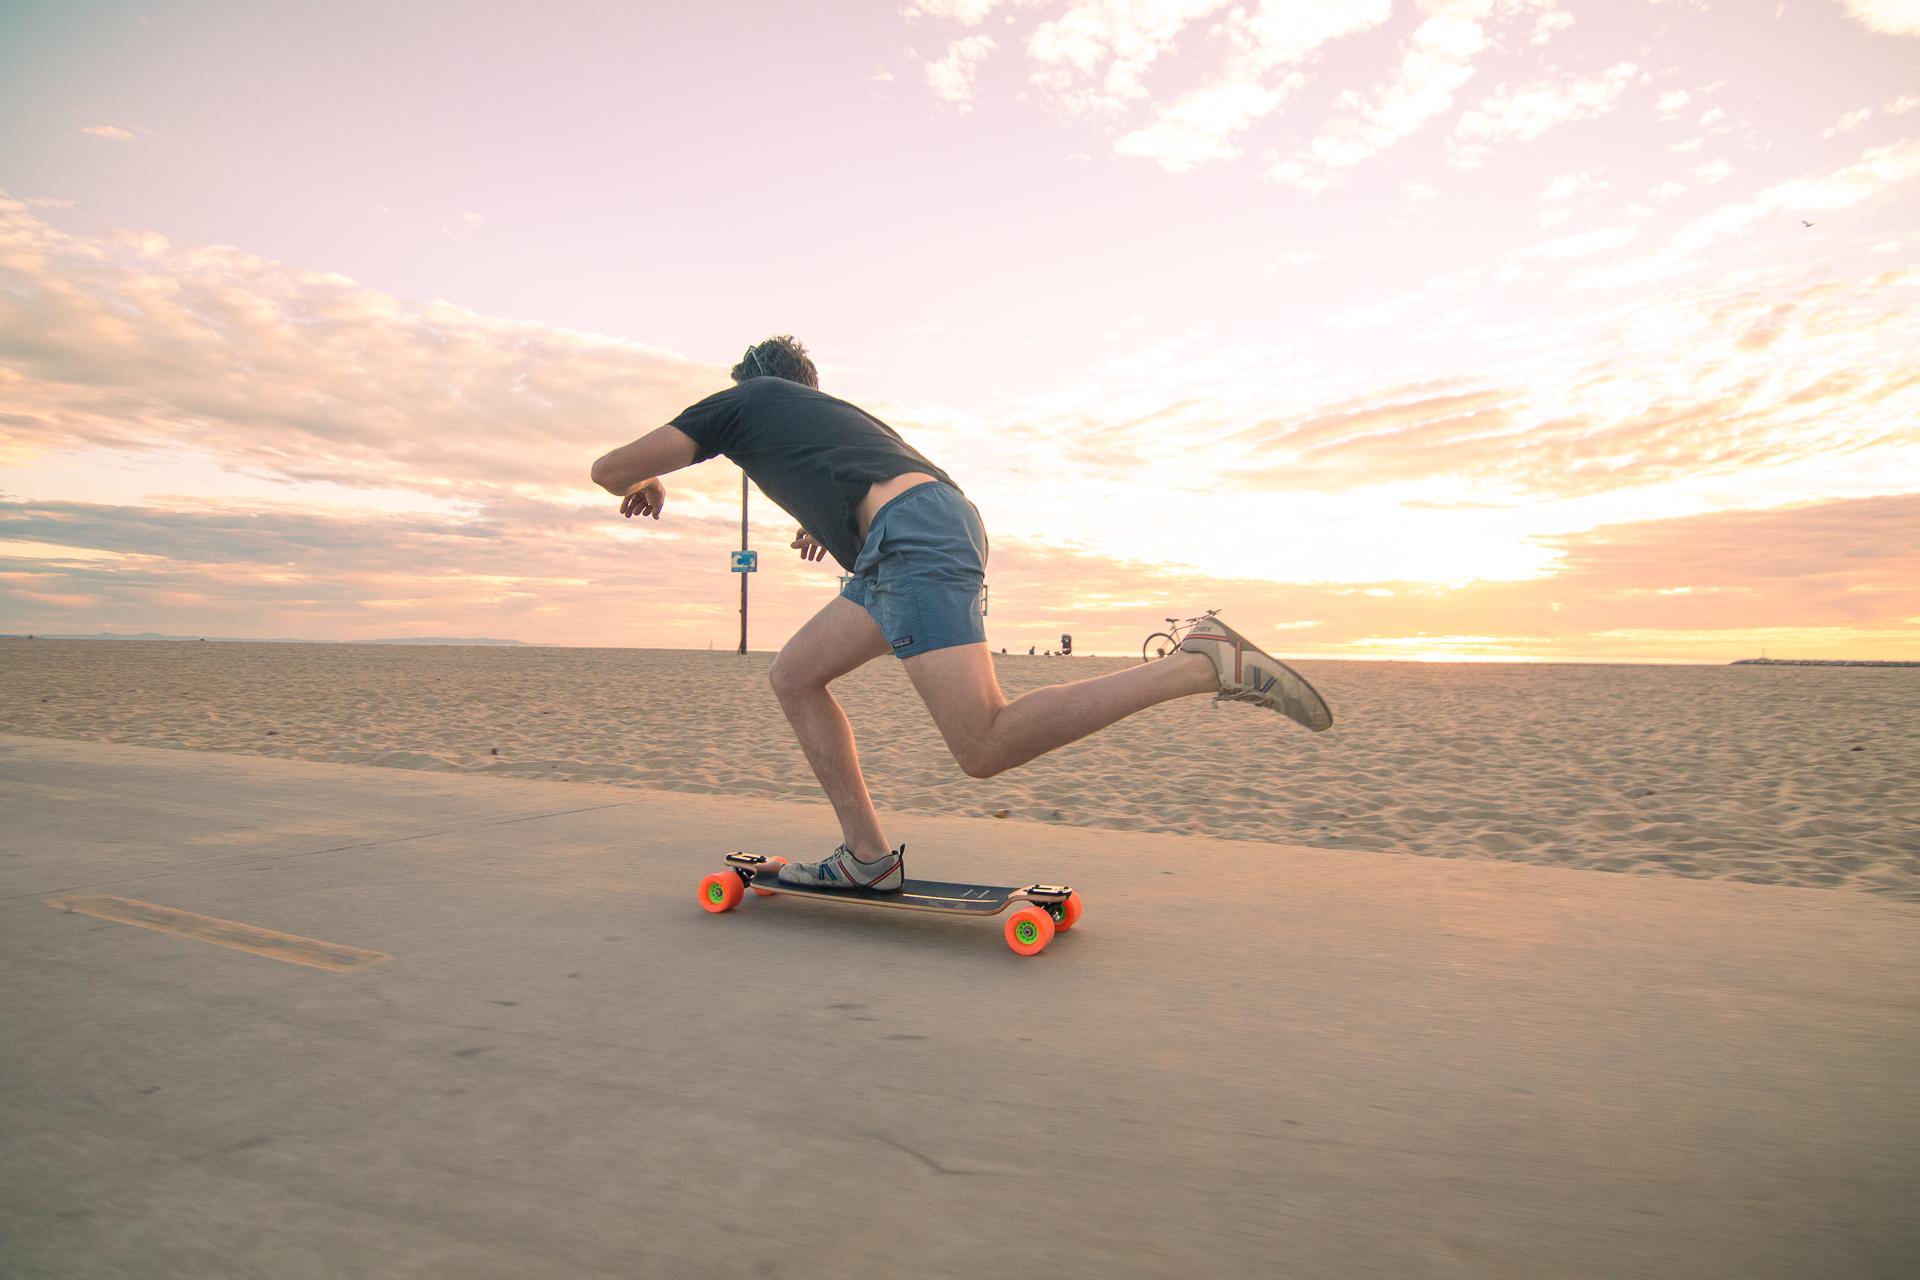 Loaded Trip Collab sunset skate